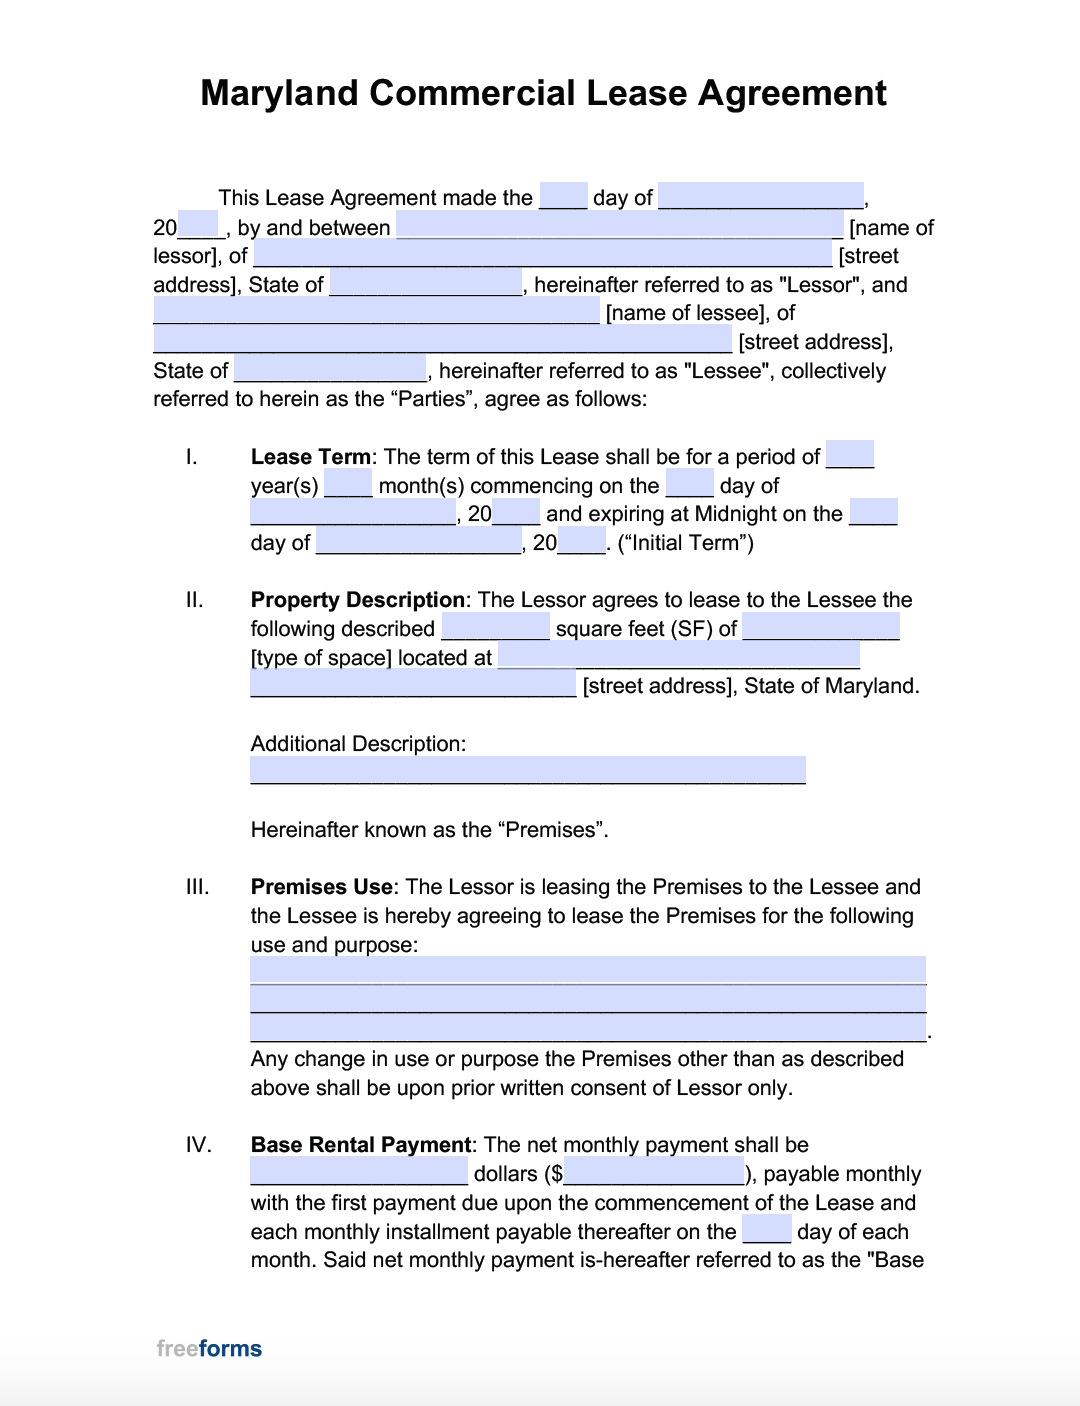 Free Maryland Commercial Lease Agreement Template PDF WORD